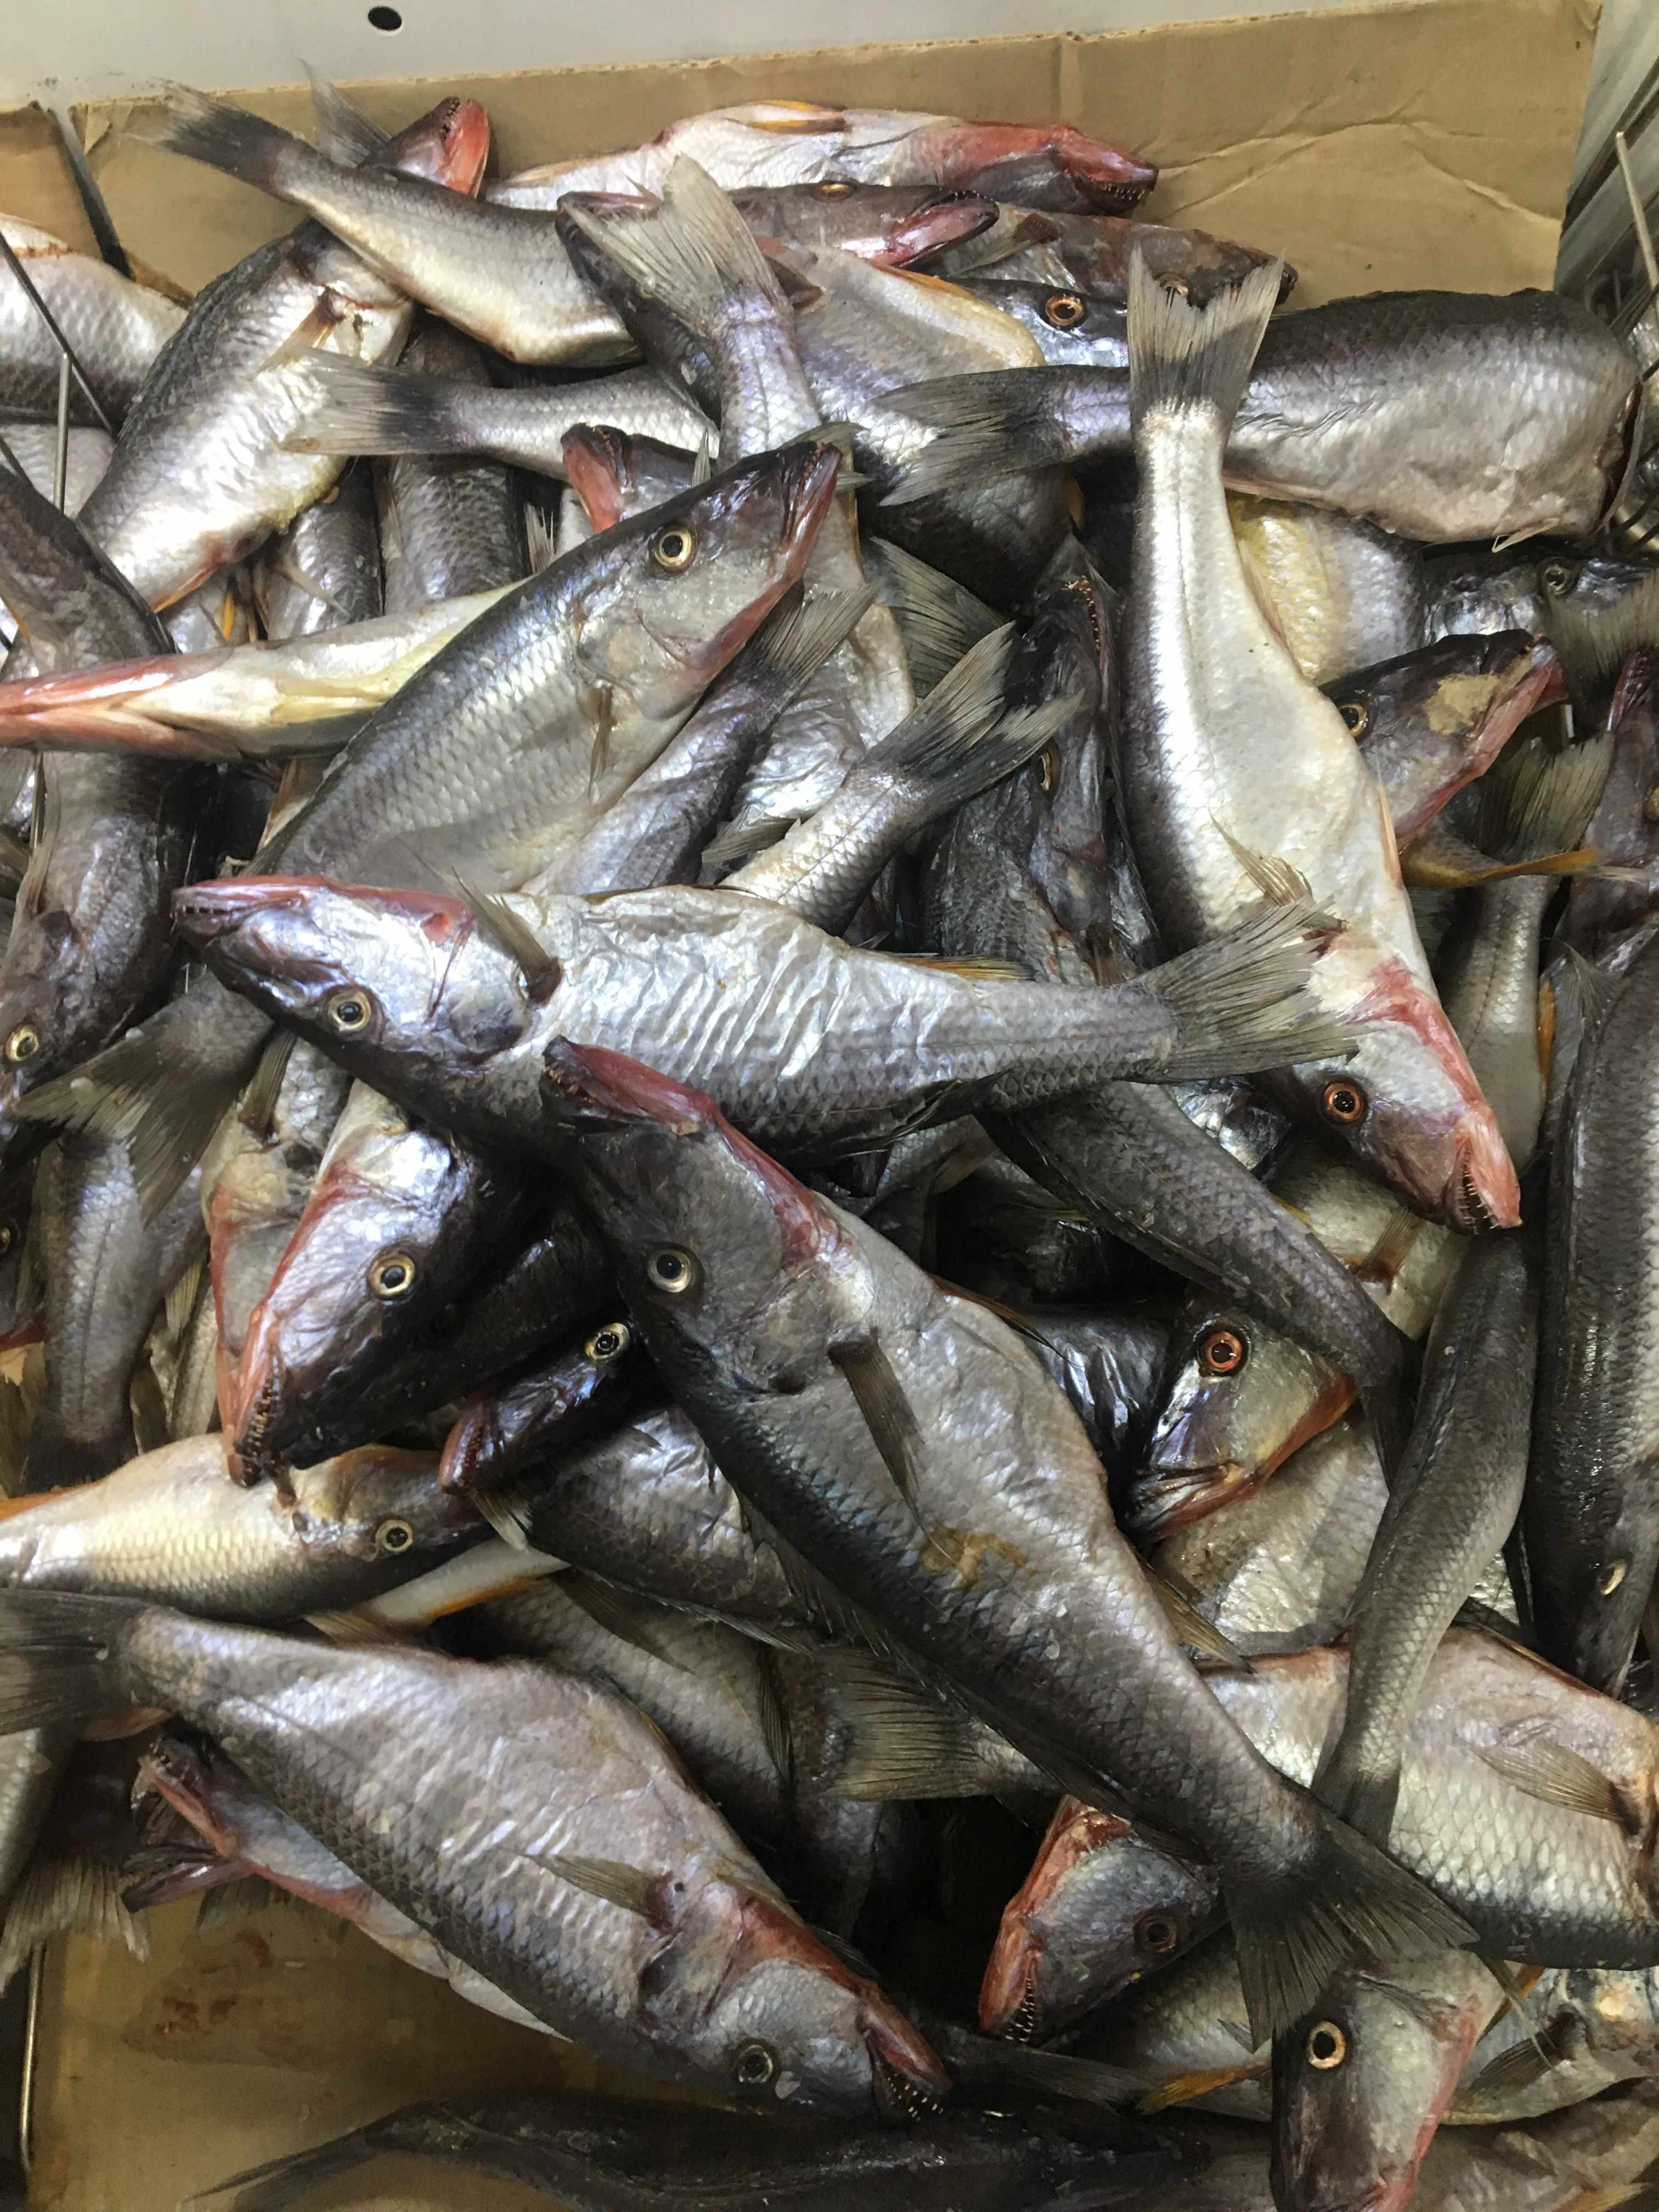 Fresh catch, locally called "mcheni" (Rhamphochromis sp.), from Lake Malawi - sold in a supermarket in capital city of Lilongwe, Malawi.  